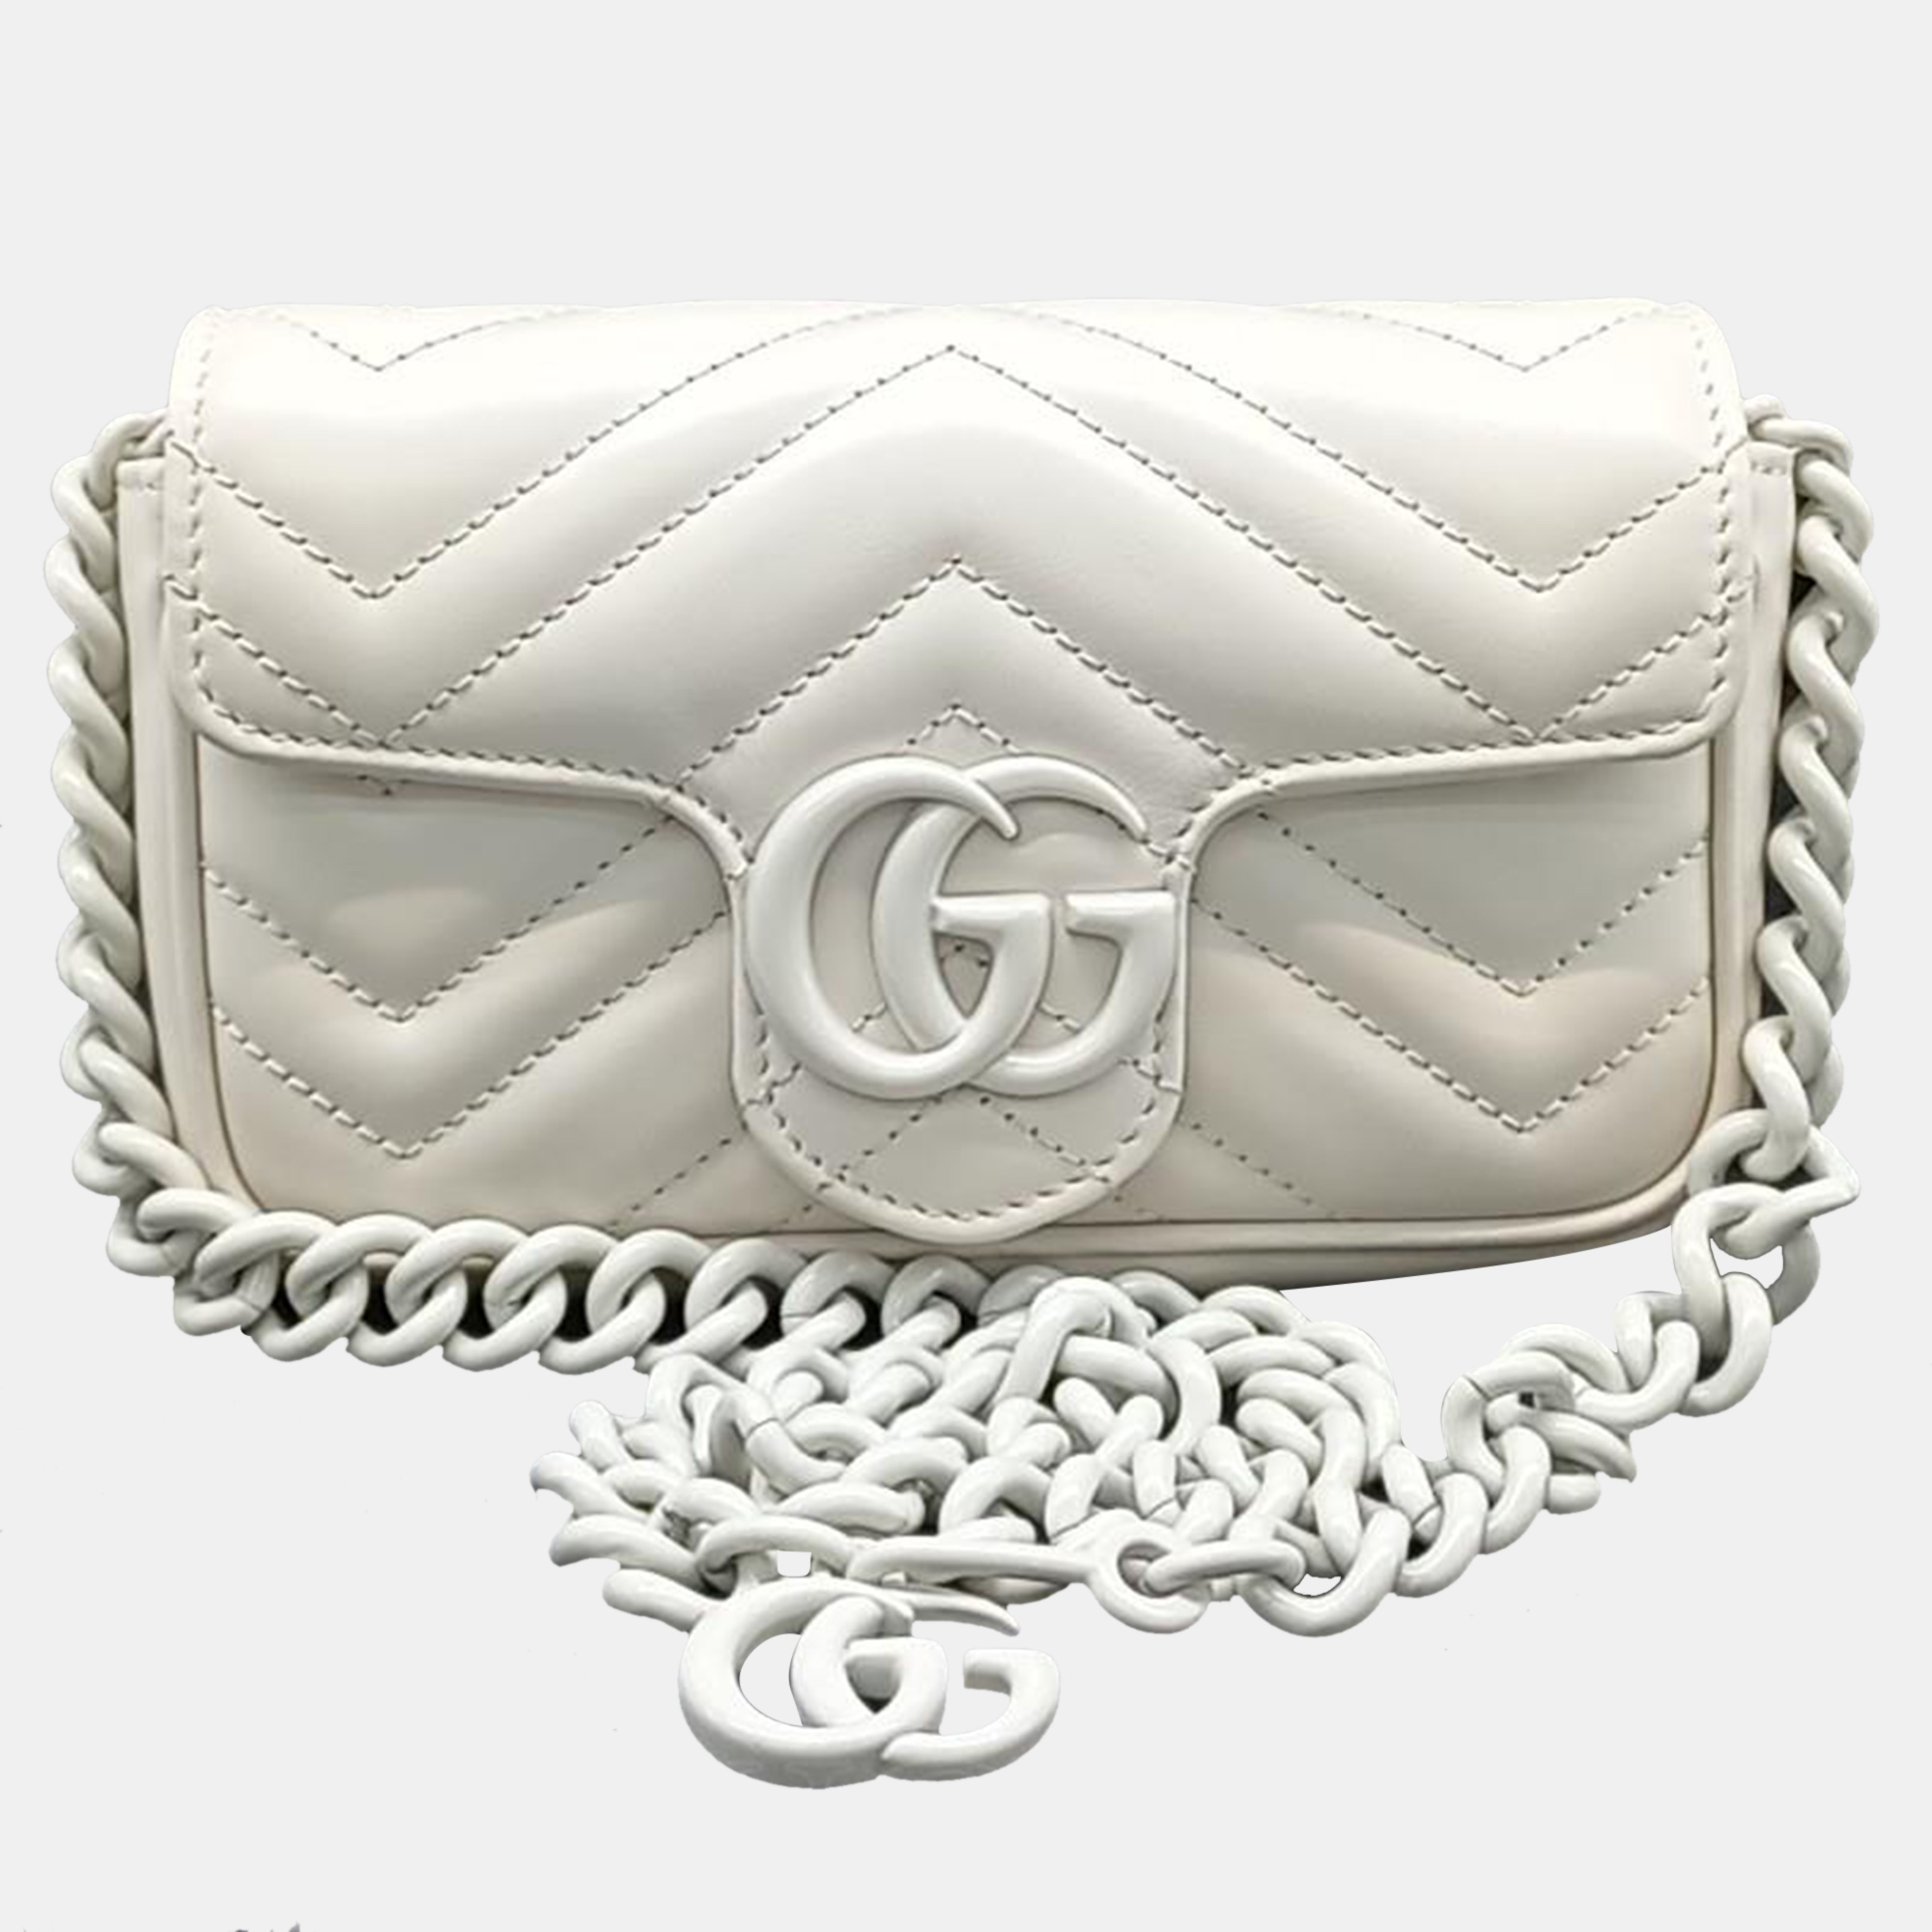 Pre-owned Gucci White Leather Gg Marmont Belt Bag